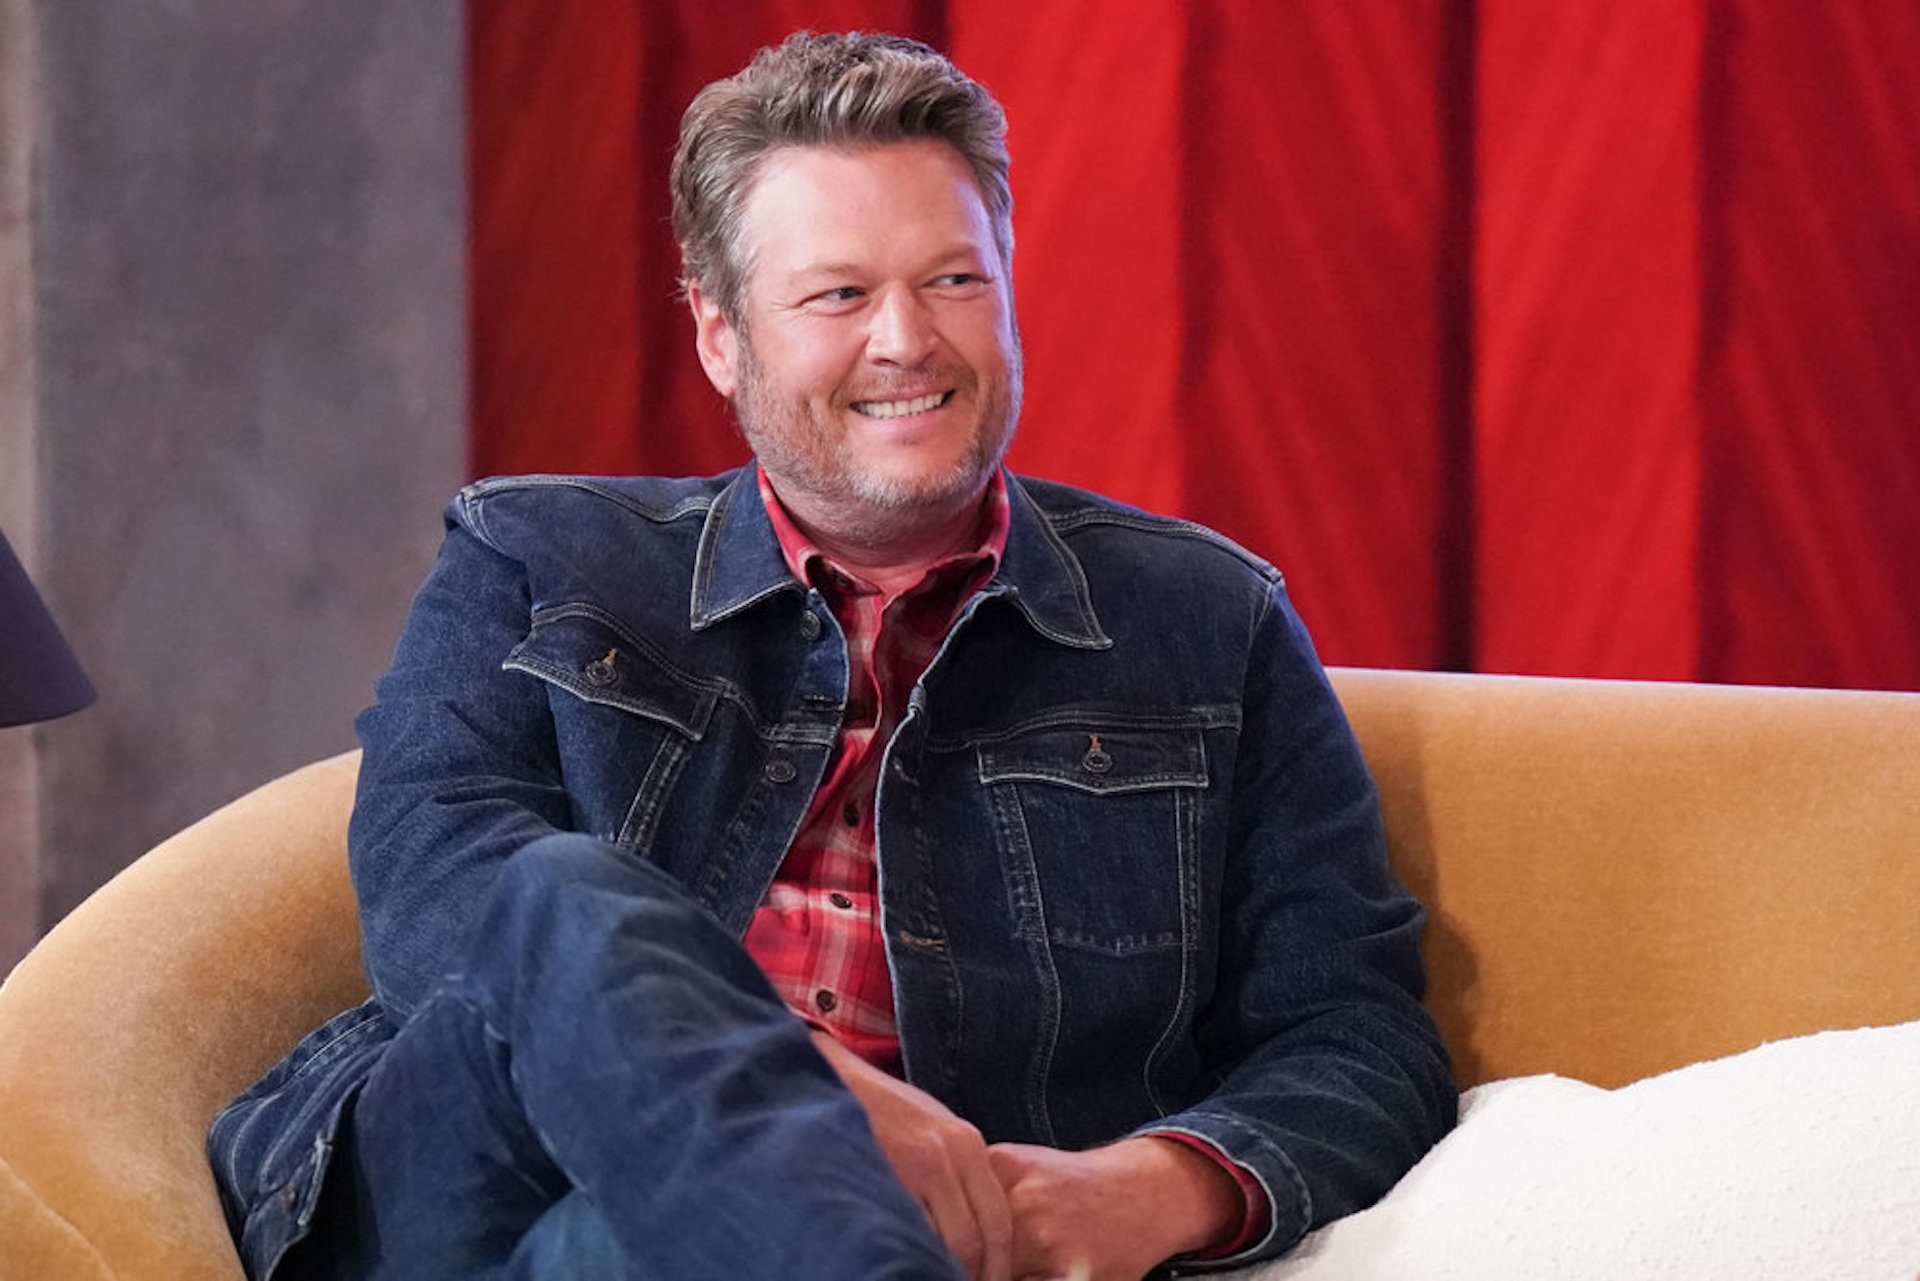 NBC announced that the next season of The Voice would be Blake Shelton's last.